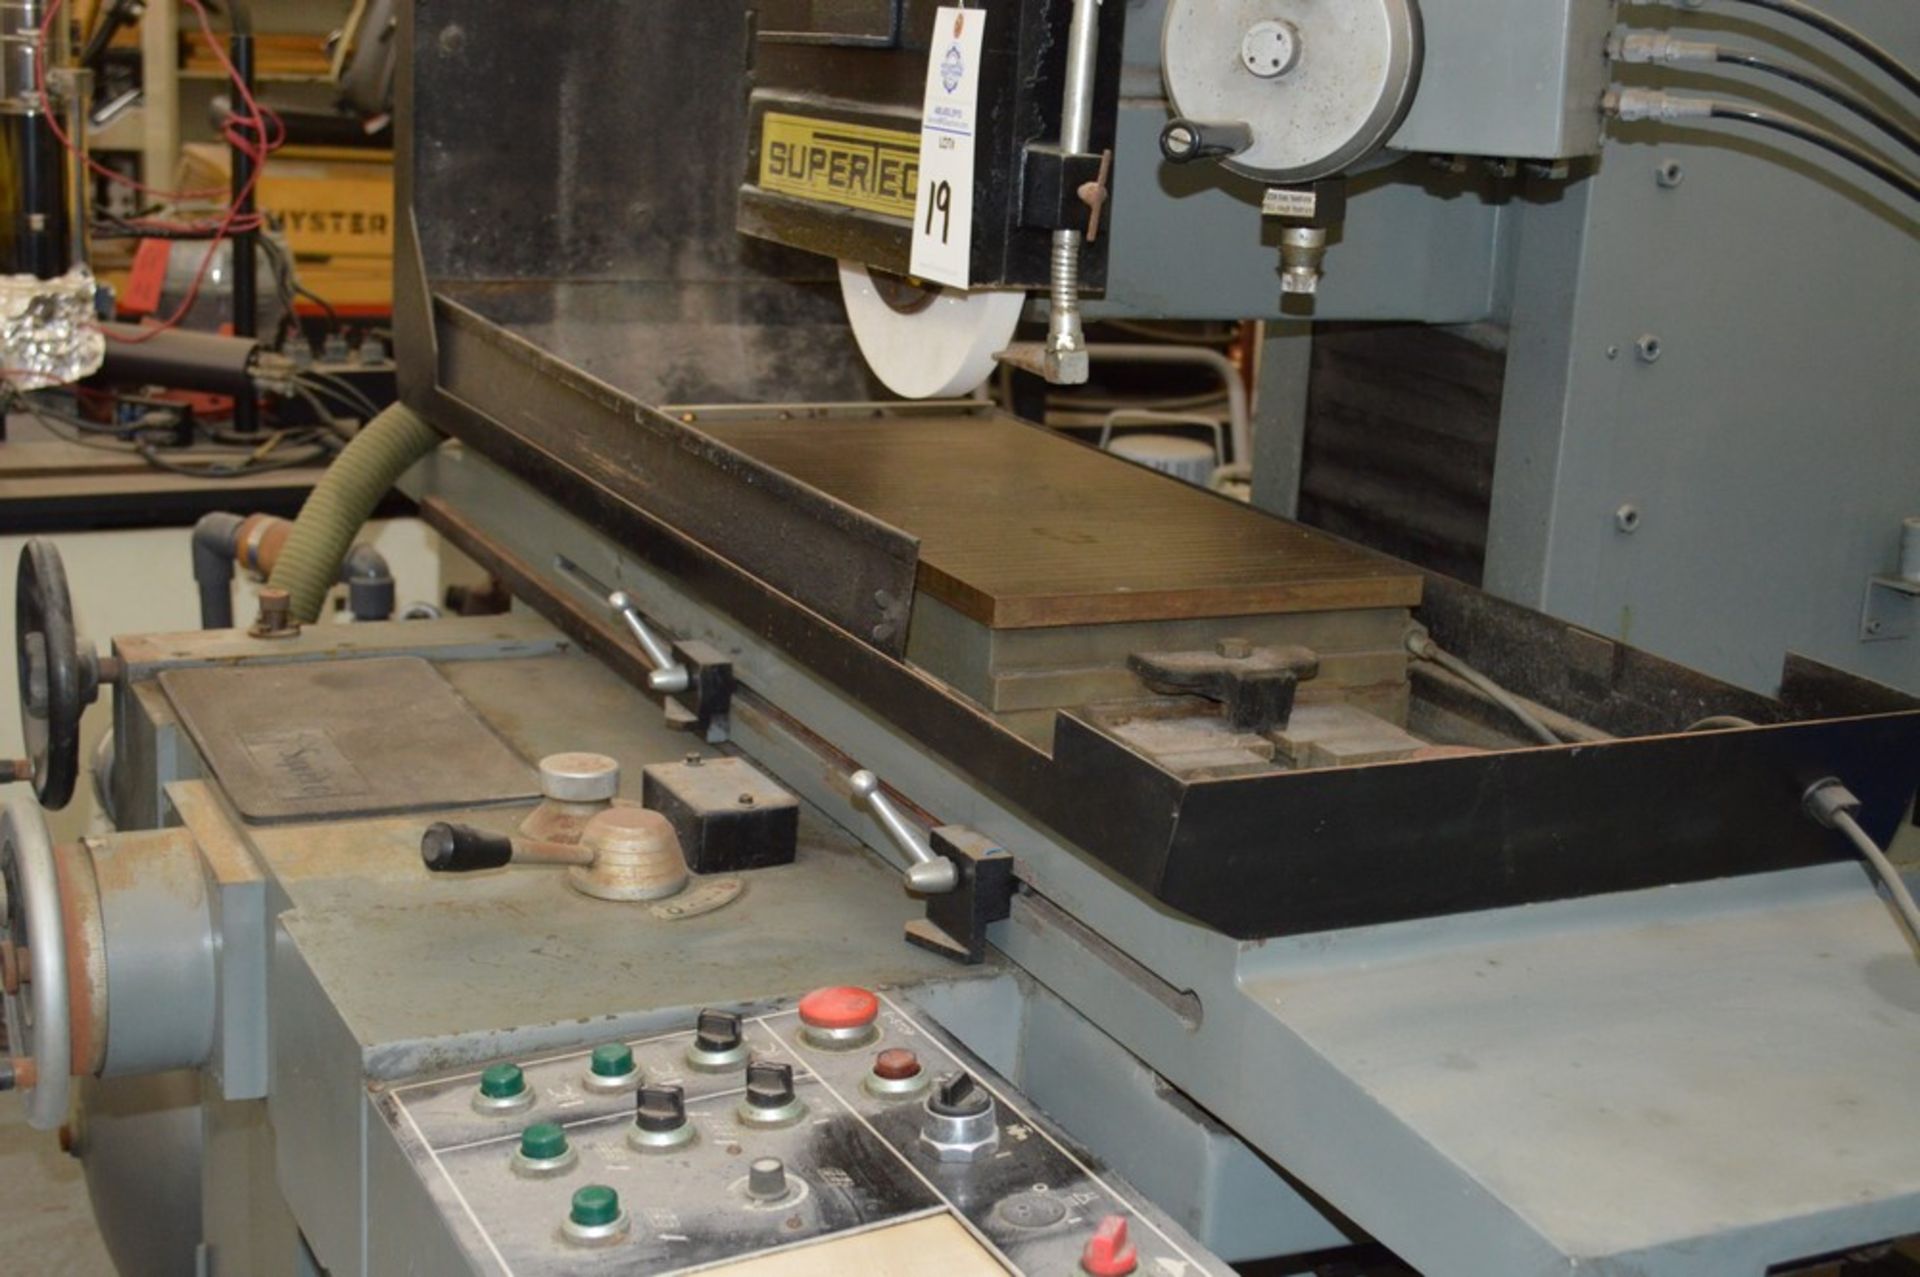 Supertec, STP-H1428 AD Grinder, Full three axis hydraulics, 12 x 27 magnetic chuck - Image 3 of 9